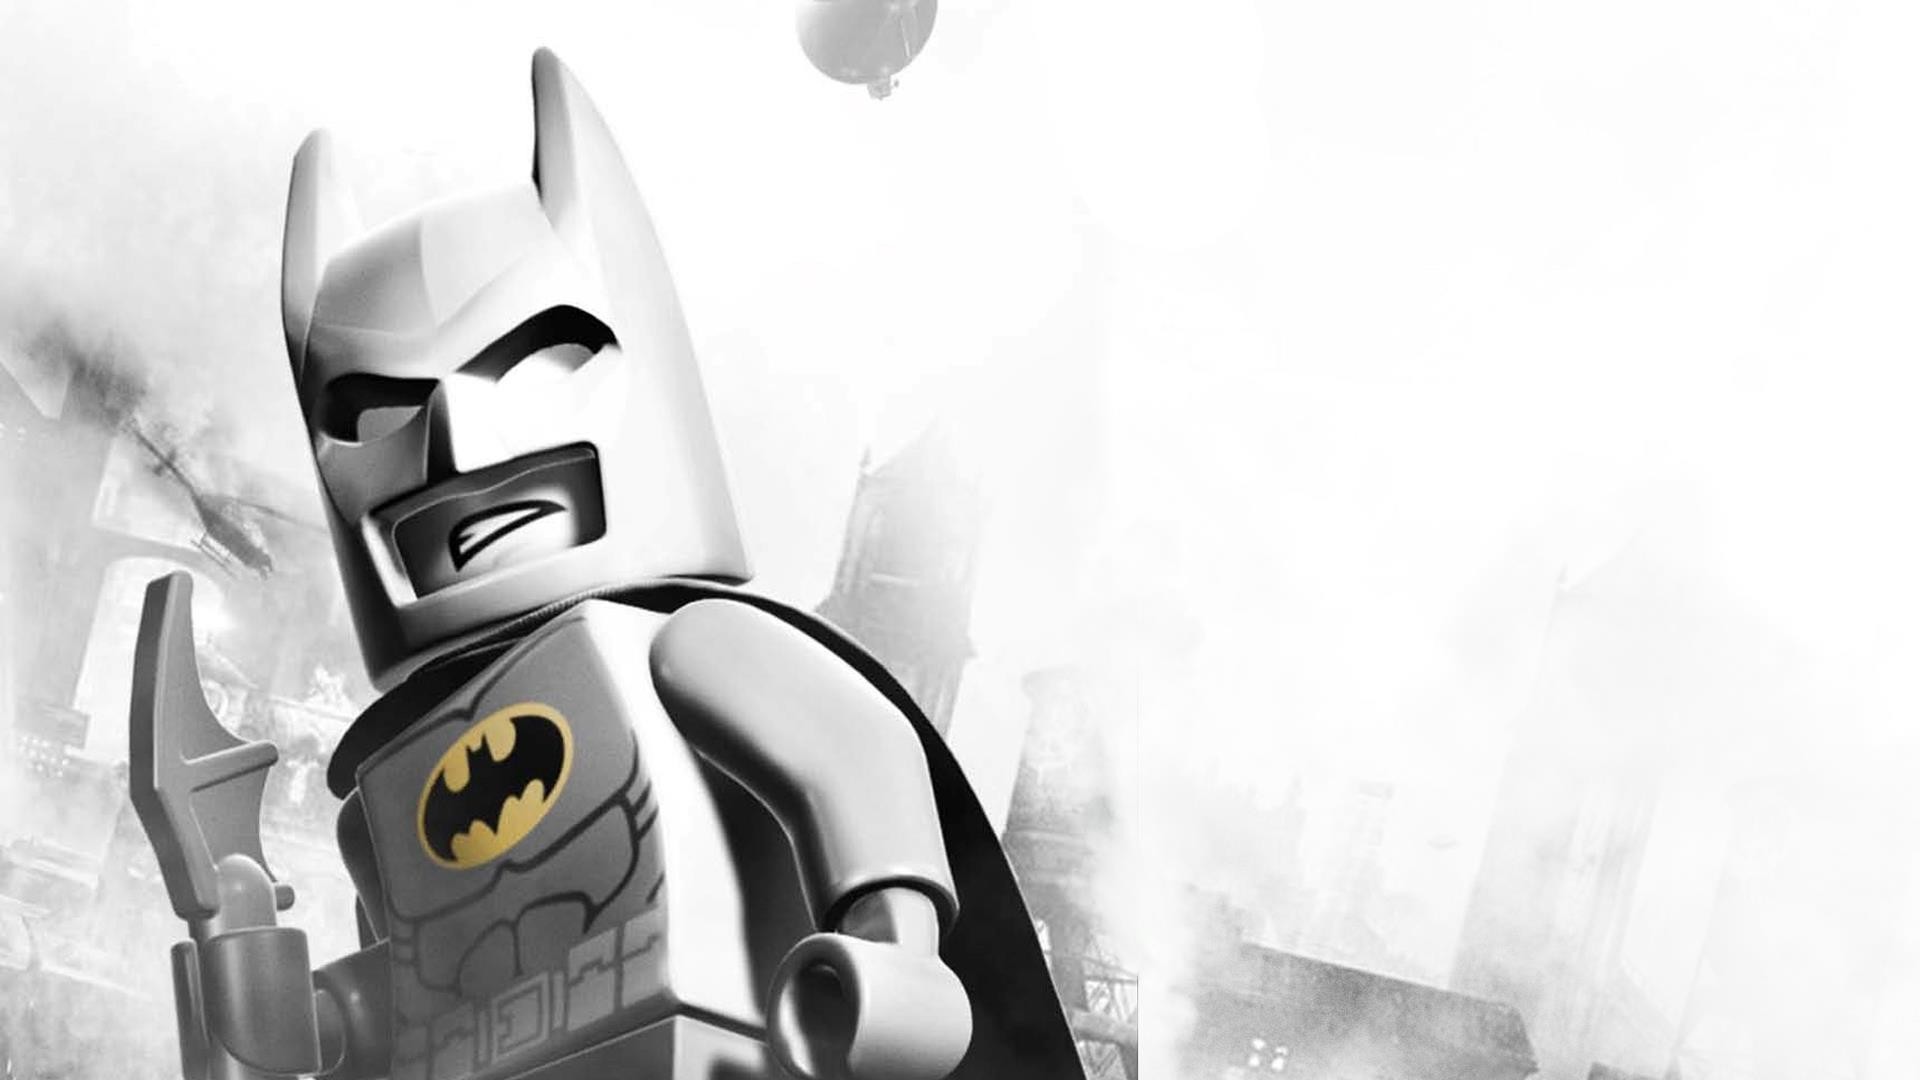 Put Some Lego People on Your Desktop With These Wallpapers 19201080 Lego Wallpaper